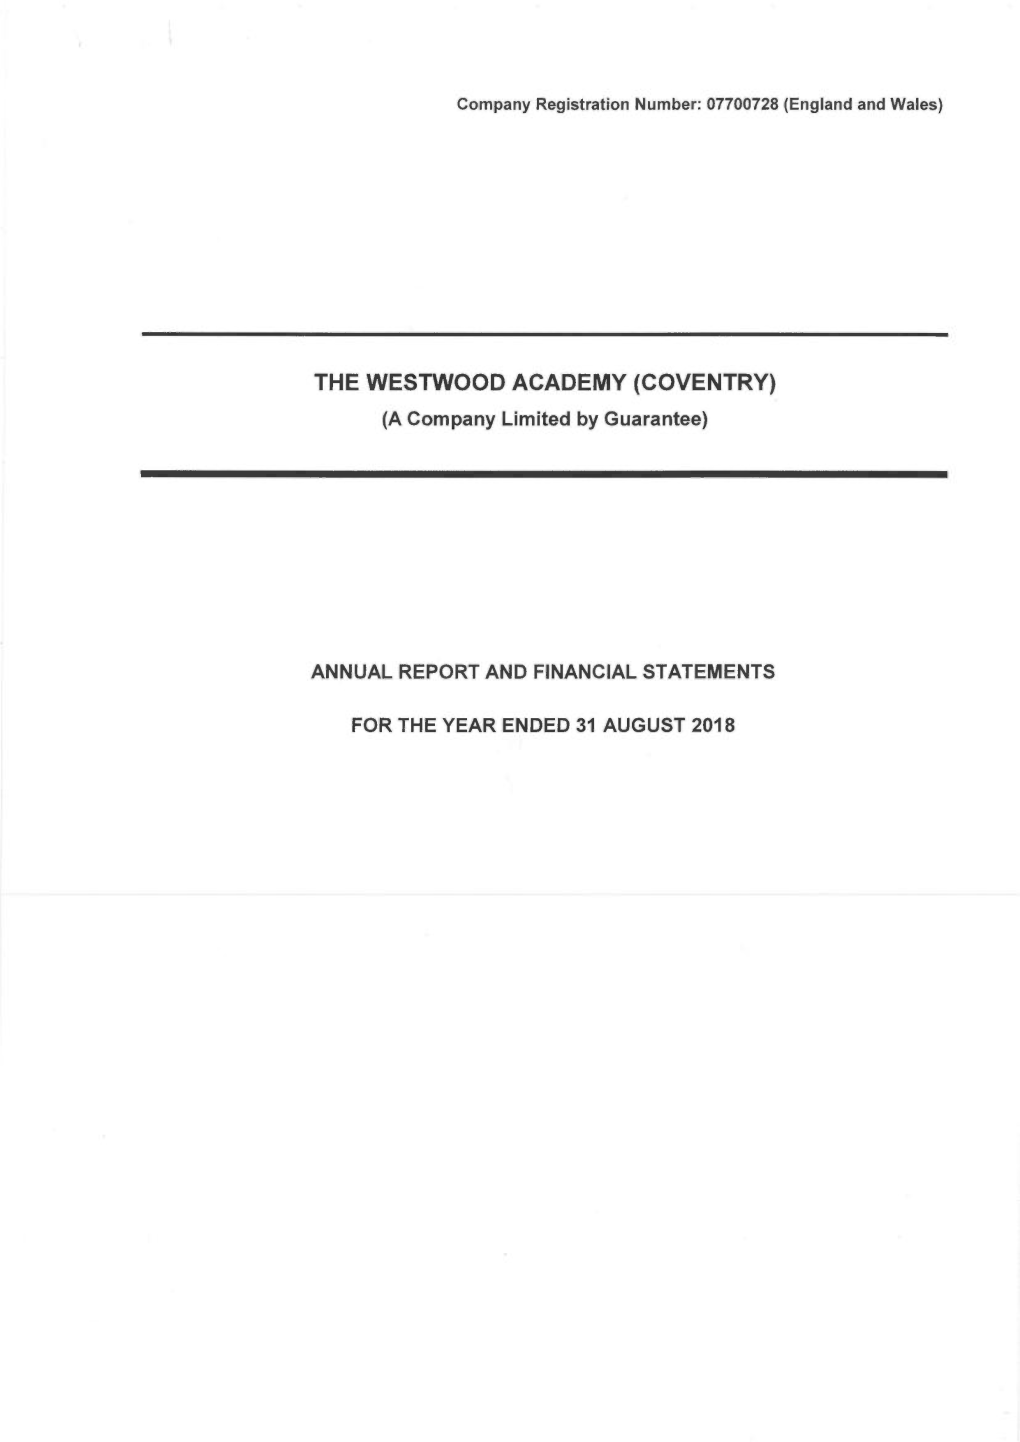 THE WESTWOOD ACADEMY (COVENTRY) (A Company Limited by Guarantee)